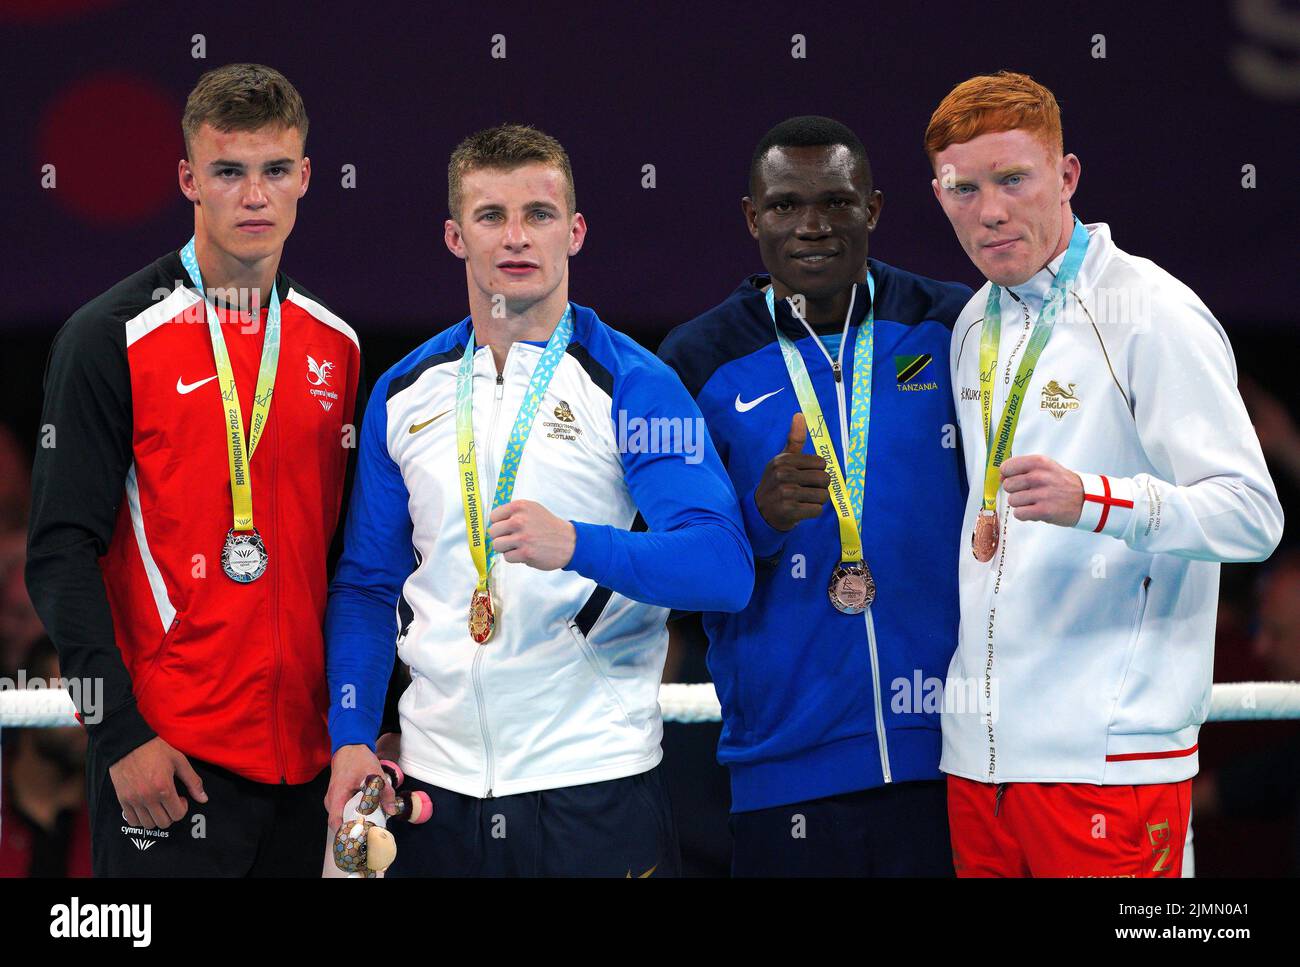 Wales' Bevan Taylor, silver, Scotland's Sean Lazzerini, gold, Tanzania's Yusuf Lu Changalawe, bronze and England's Aaron Bowen, bronze after the Men's Light Heavy 75-80kg boxing at The NEC on day ten of the 2022 Commonwealth Games in Birmingham. Picture date: Sunday August 7, 2022. Stock Photo